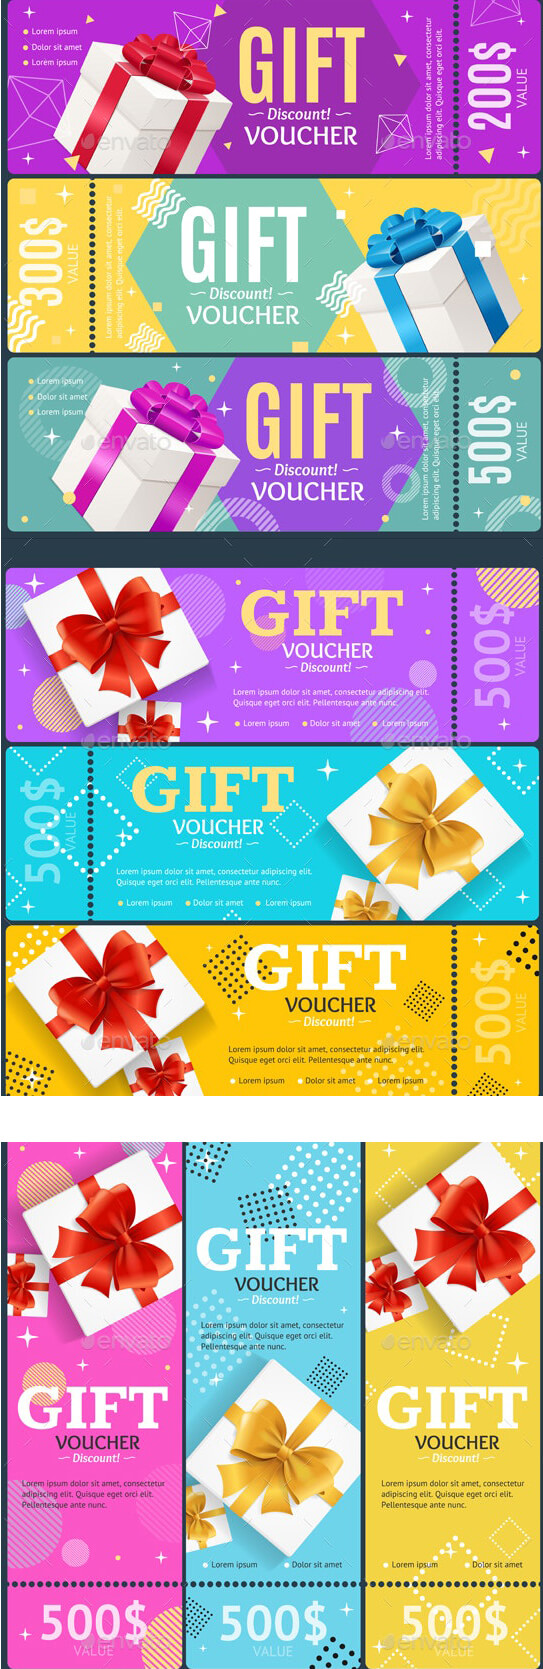 10 Free Gift Coupon Templates For Anything Word PSD AI 